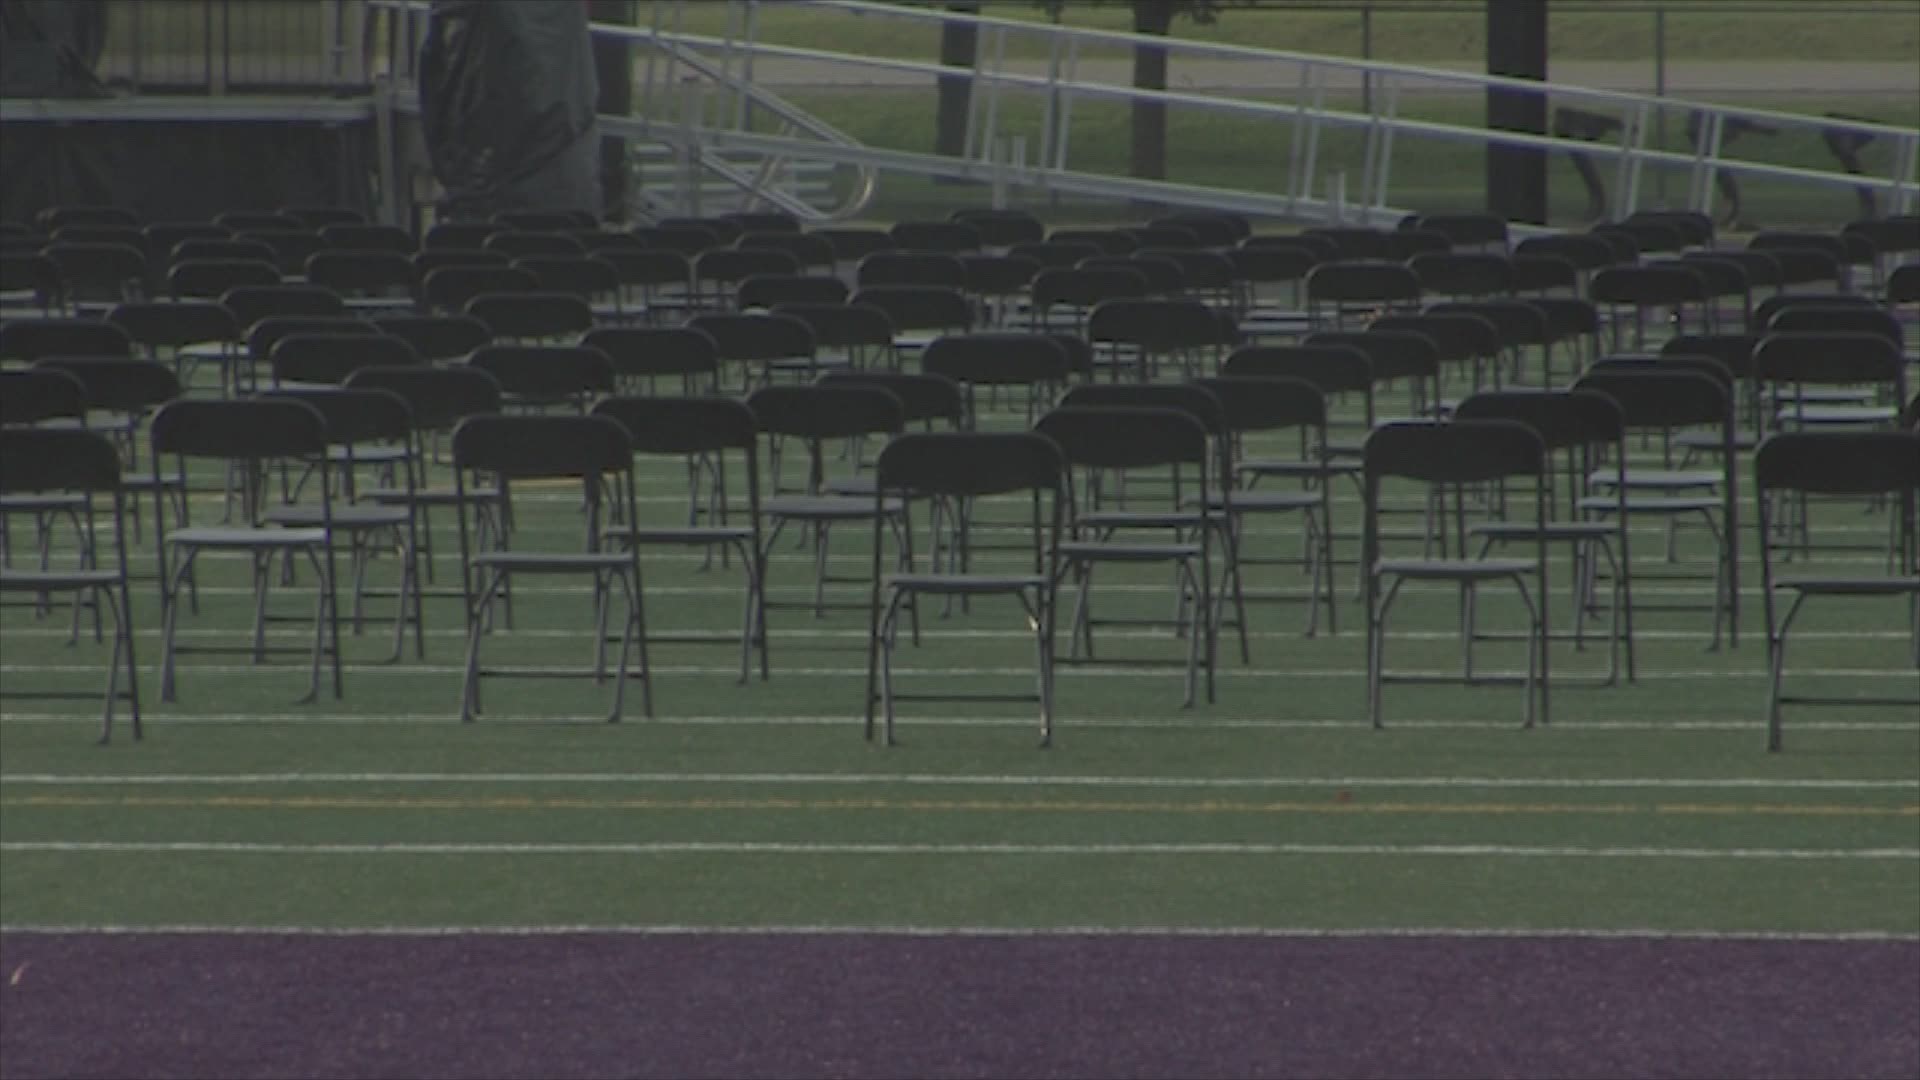 Waukee graduation continues with social distancing